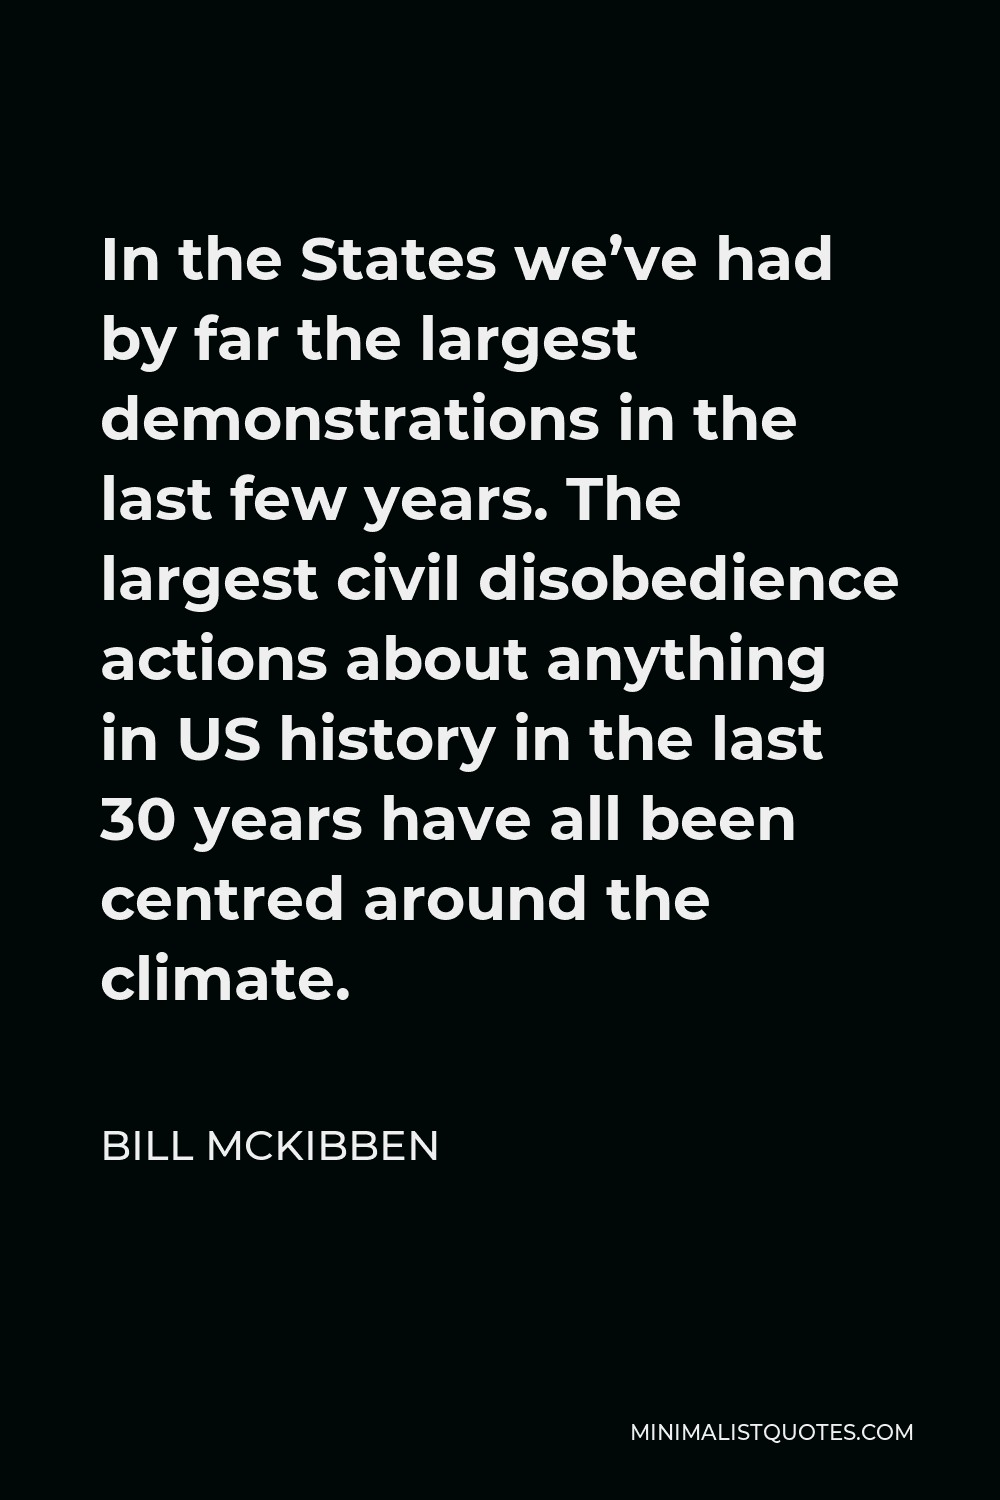 Bill McKibben Quote - In the States we’ve had by far the largest demonstrations in the last few years. The largest civil disobedience actions about anything in US history in the last 30 years have all been centred around the climate.